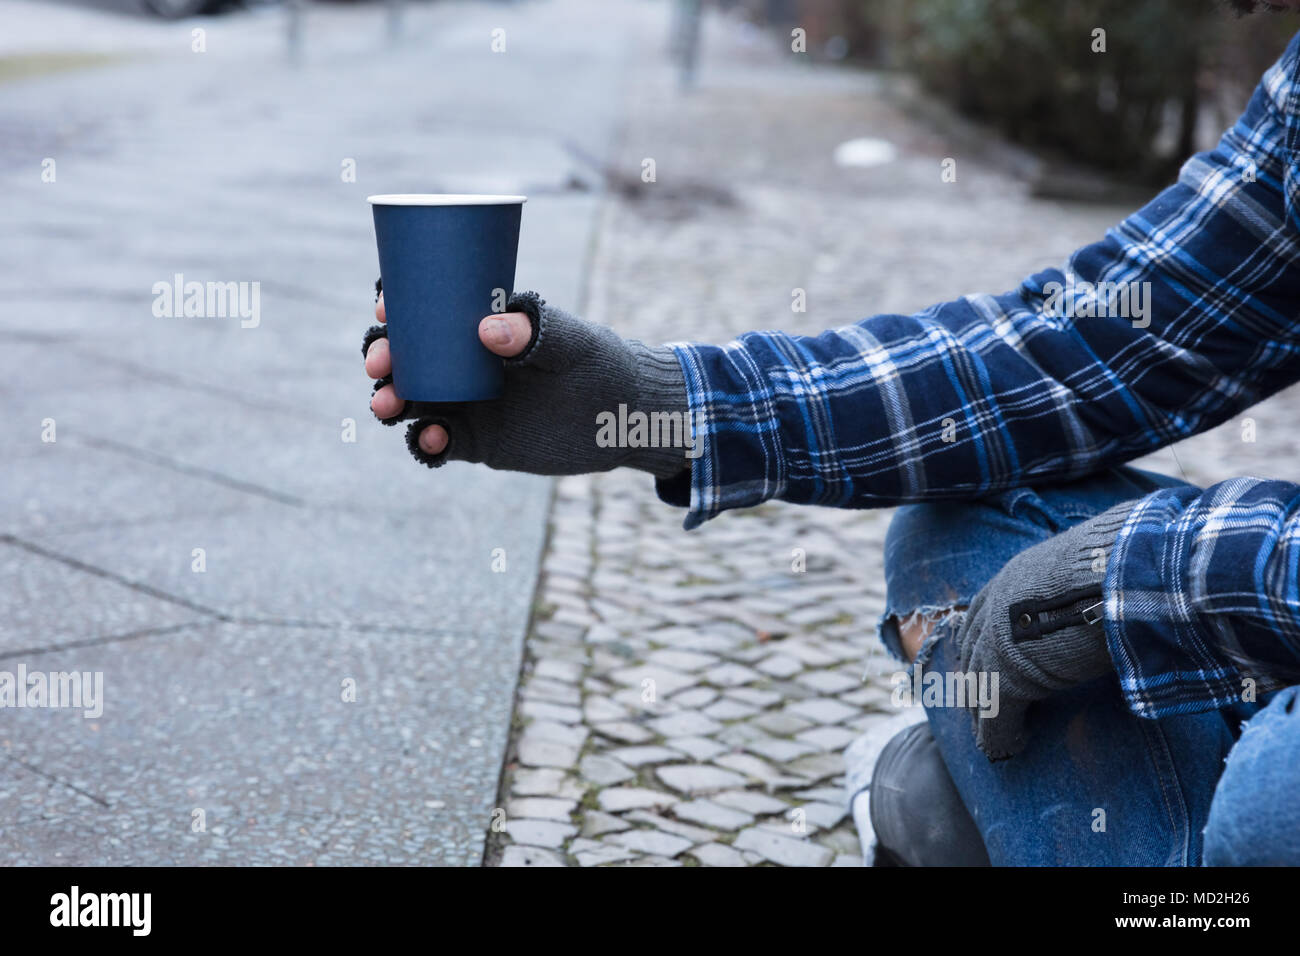 Beggar's Hand Wearing Gloves Holding Disposable Cup Stock Photo